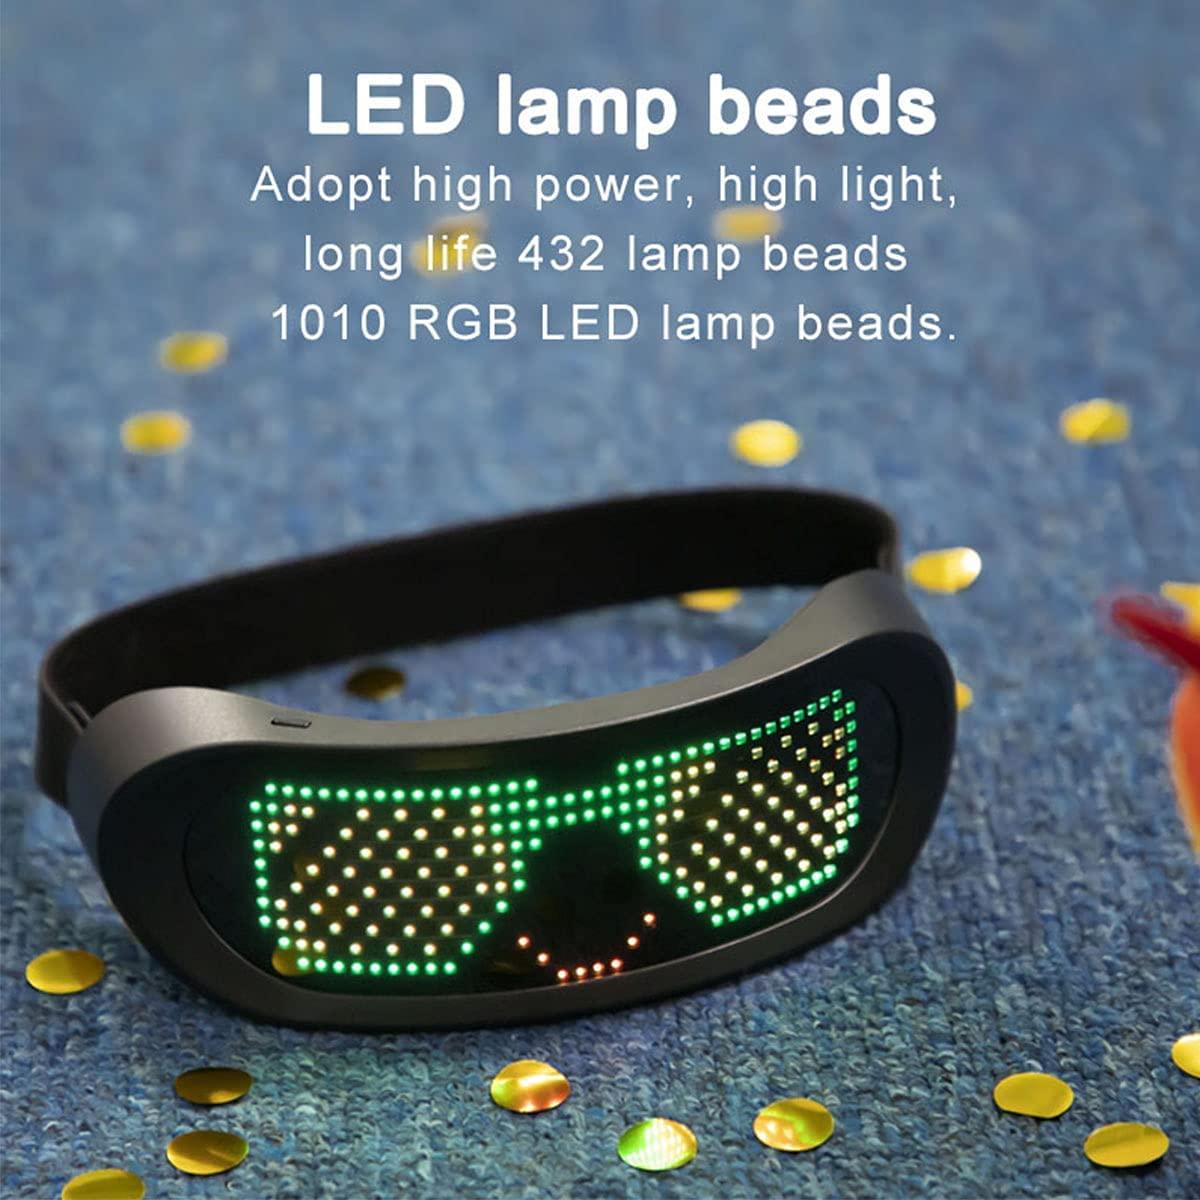 Leadleds Customizable Bluetooth LED Glasses for Raves, Festivals, Fun, Parties, Sports, Costumes, EDM, Flashing